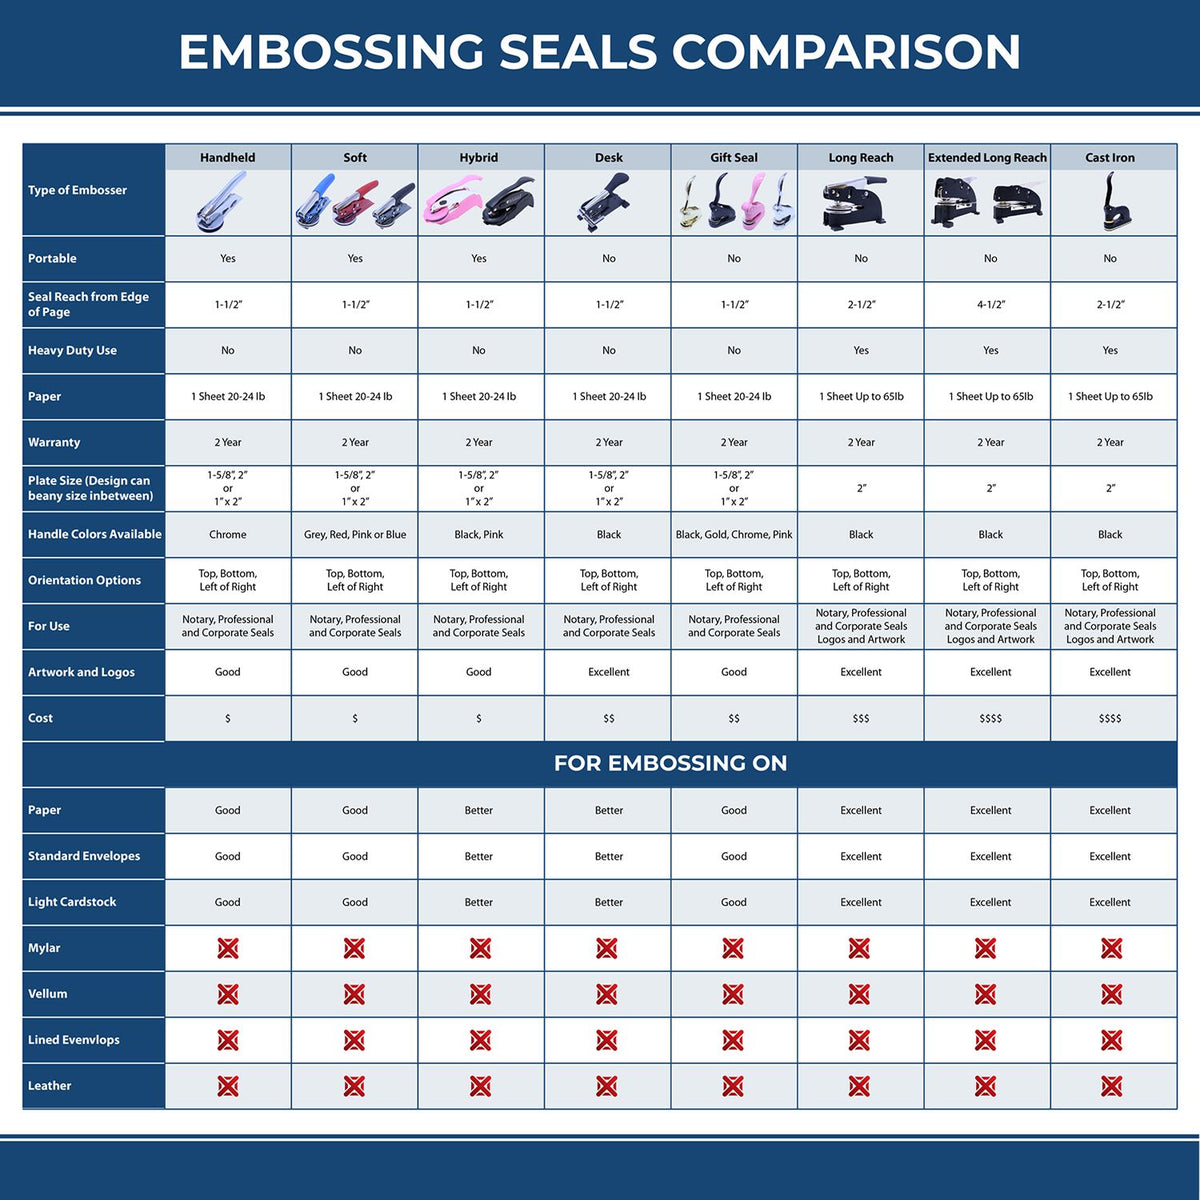 A comparison chart for the different types of mount models available for the Gift Connecticut Land Surveyor Seal